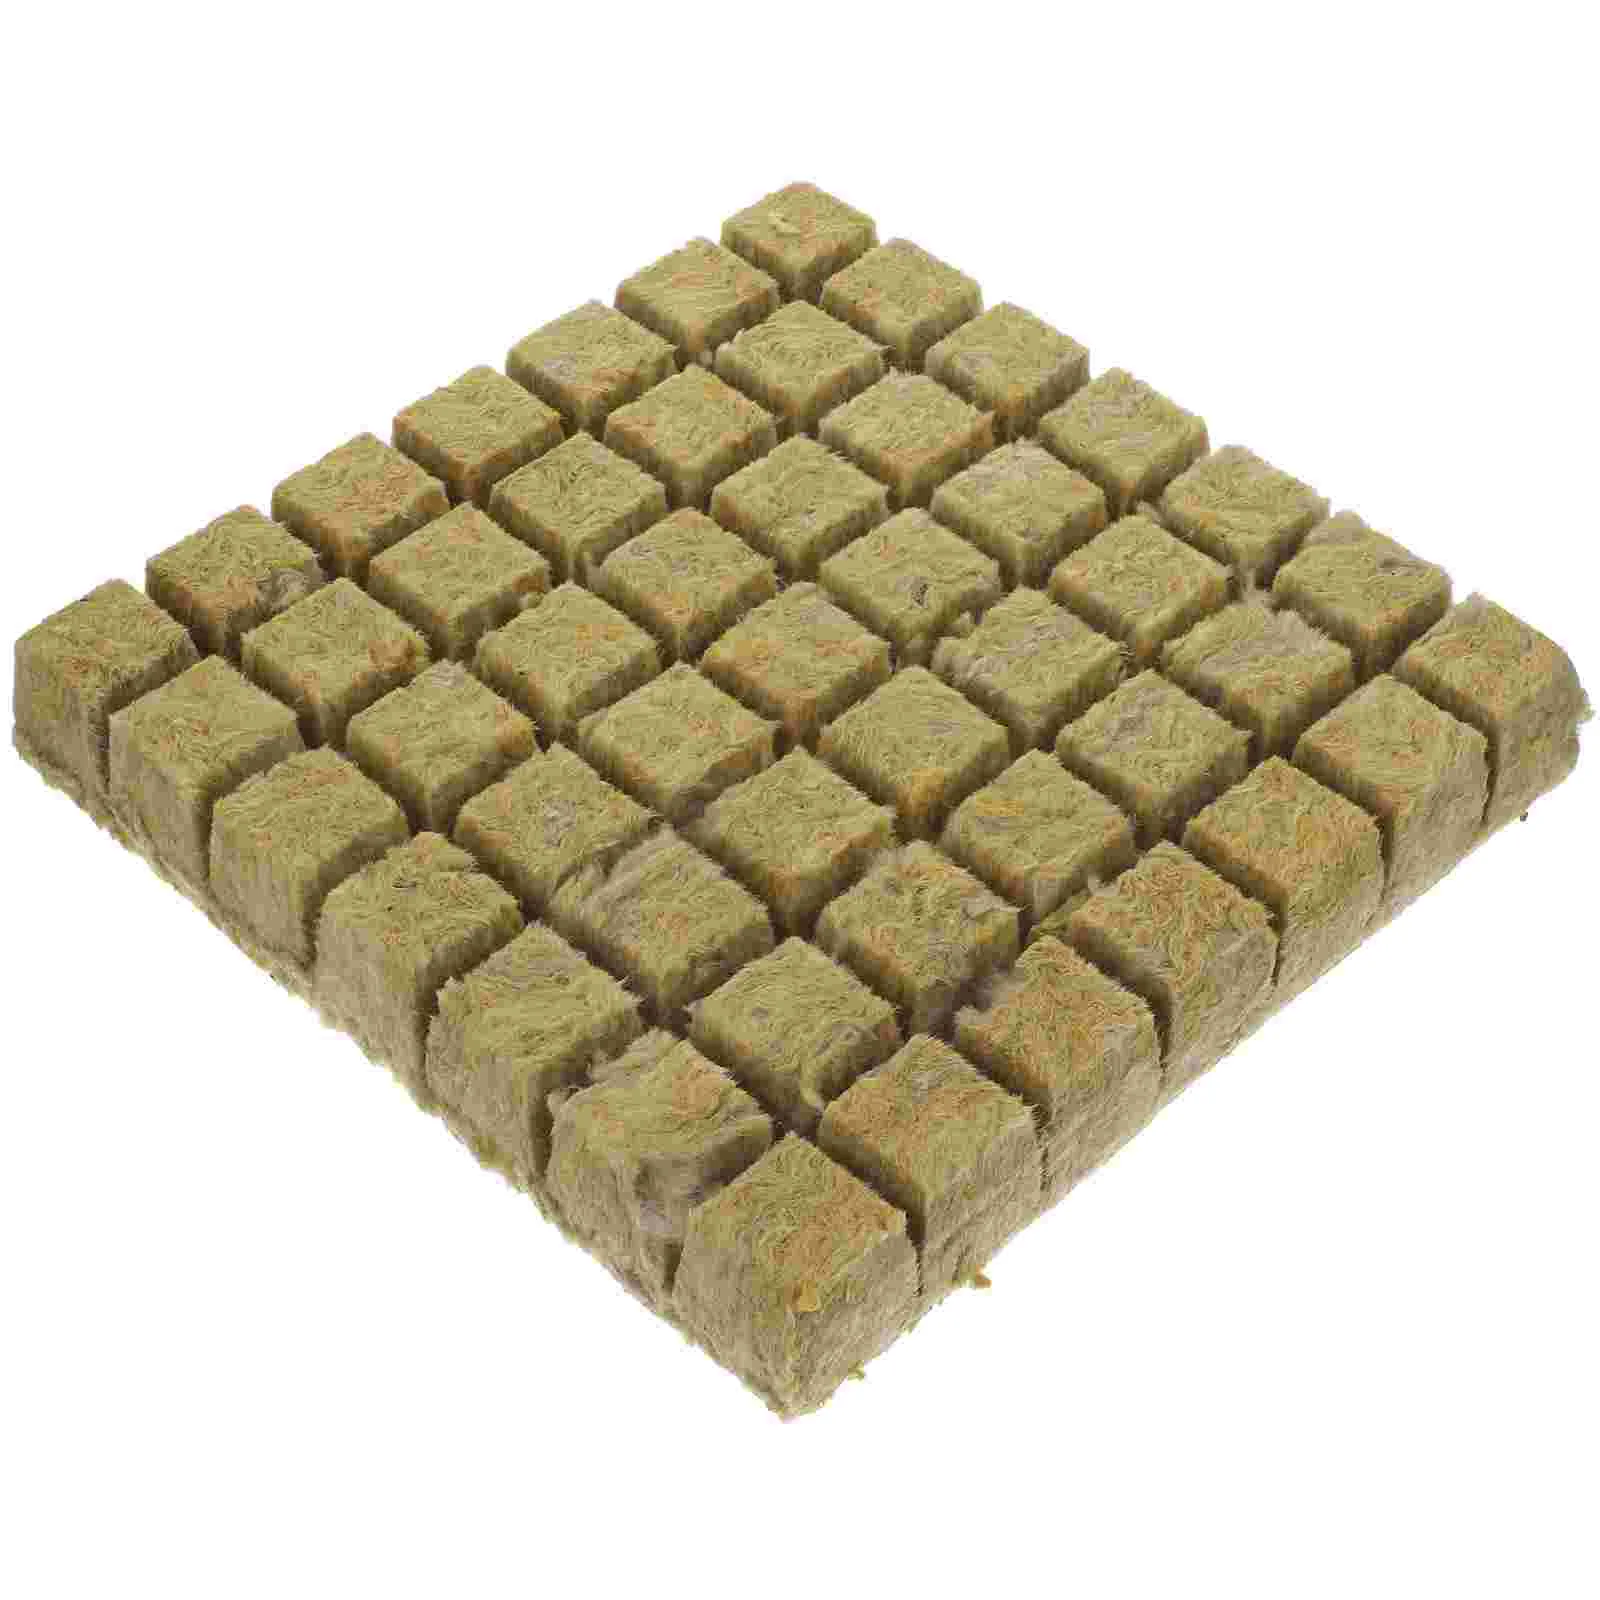 

Block Grow Plugs Starter Cube Cubes Hydroponic Gardening Germination Wool Soil Soilless Planting Cultivation Hydroponics Culture